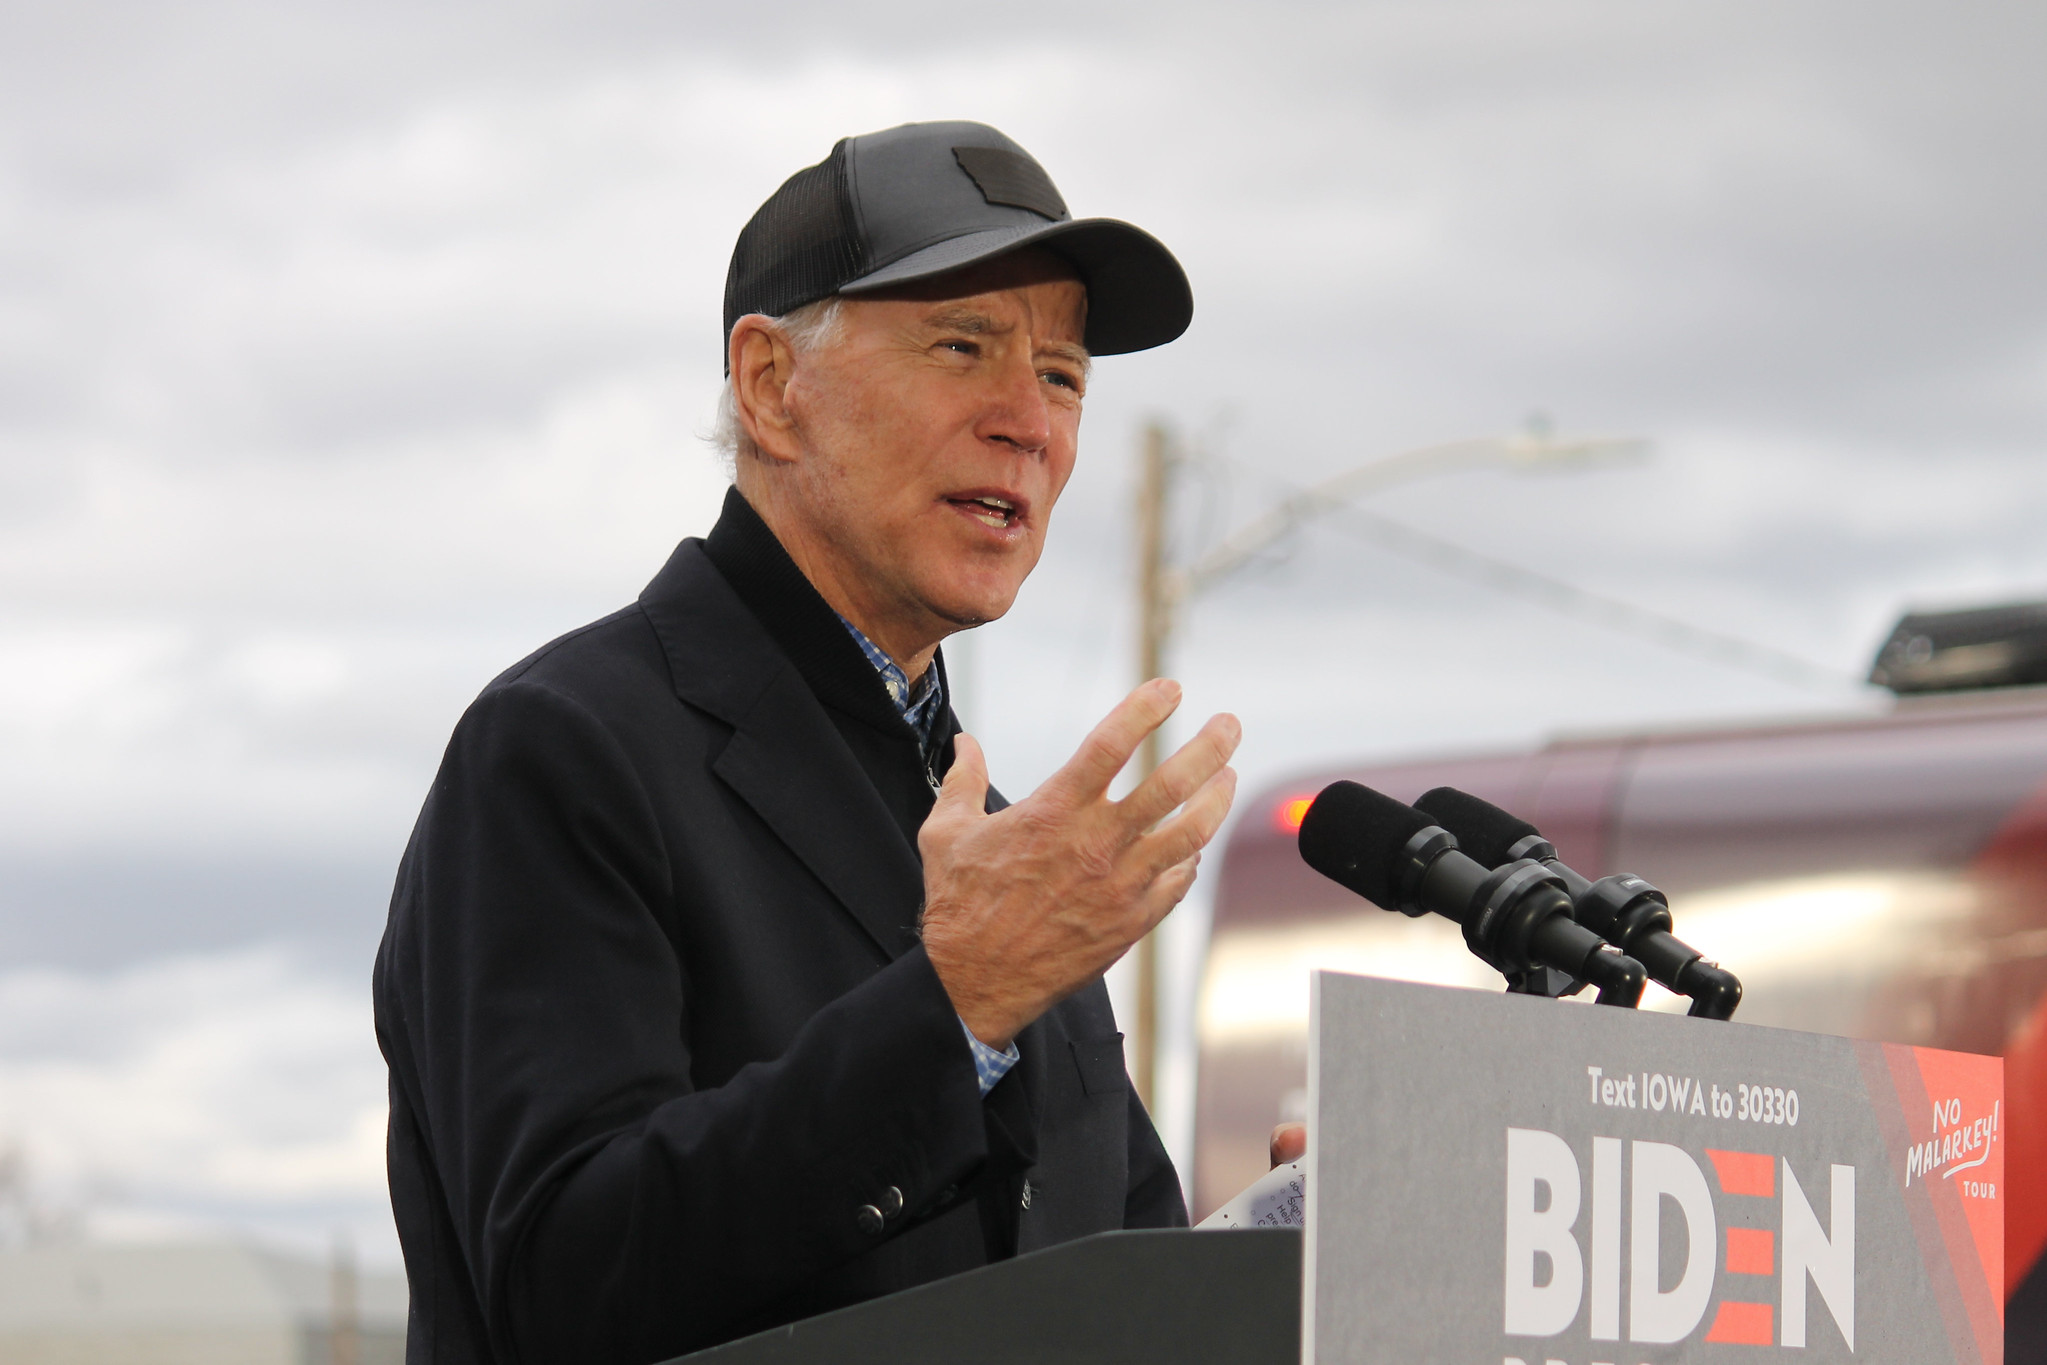 10 Strange Effects of Biden’s ‘Return to Normalcy’ on Americans